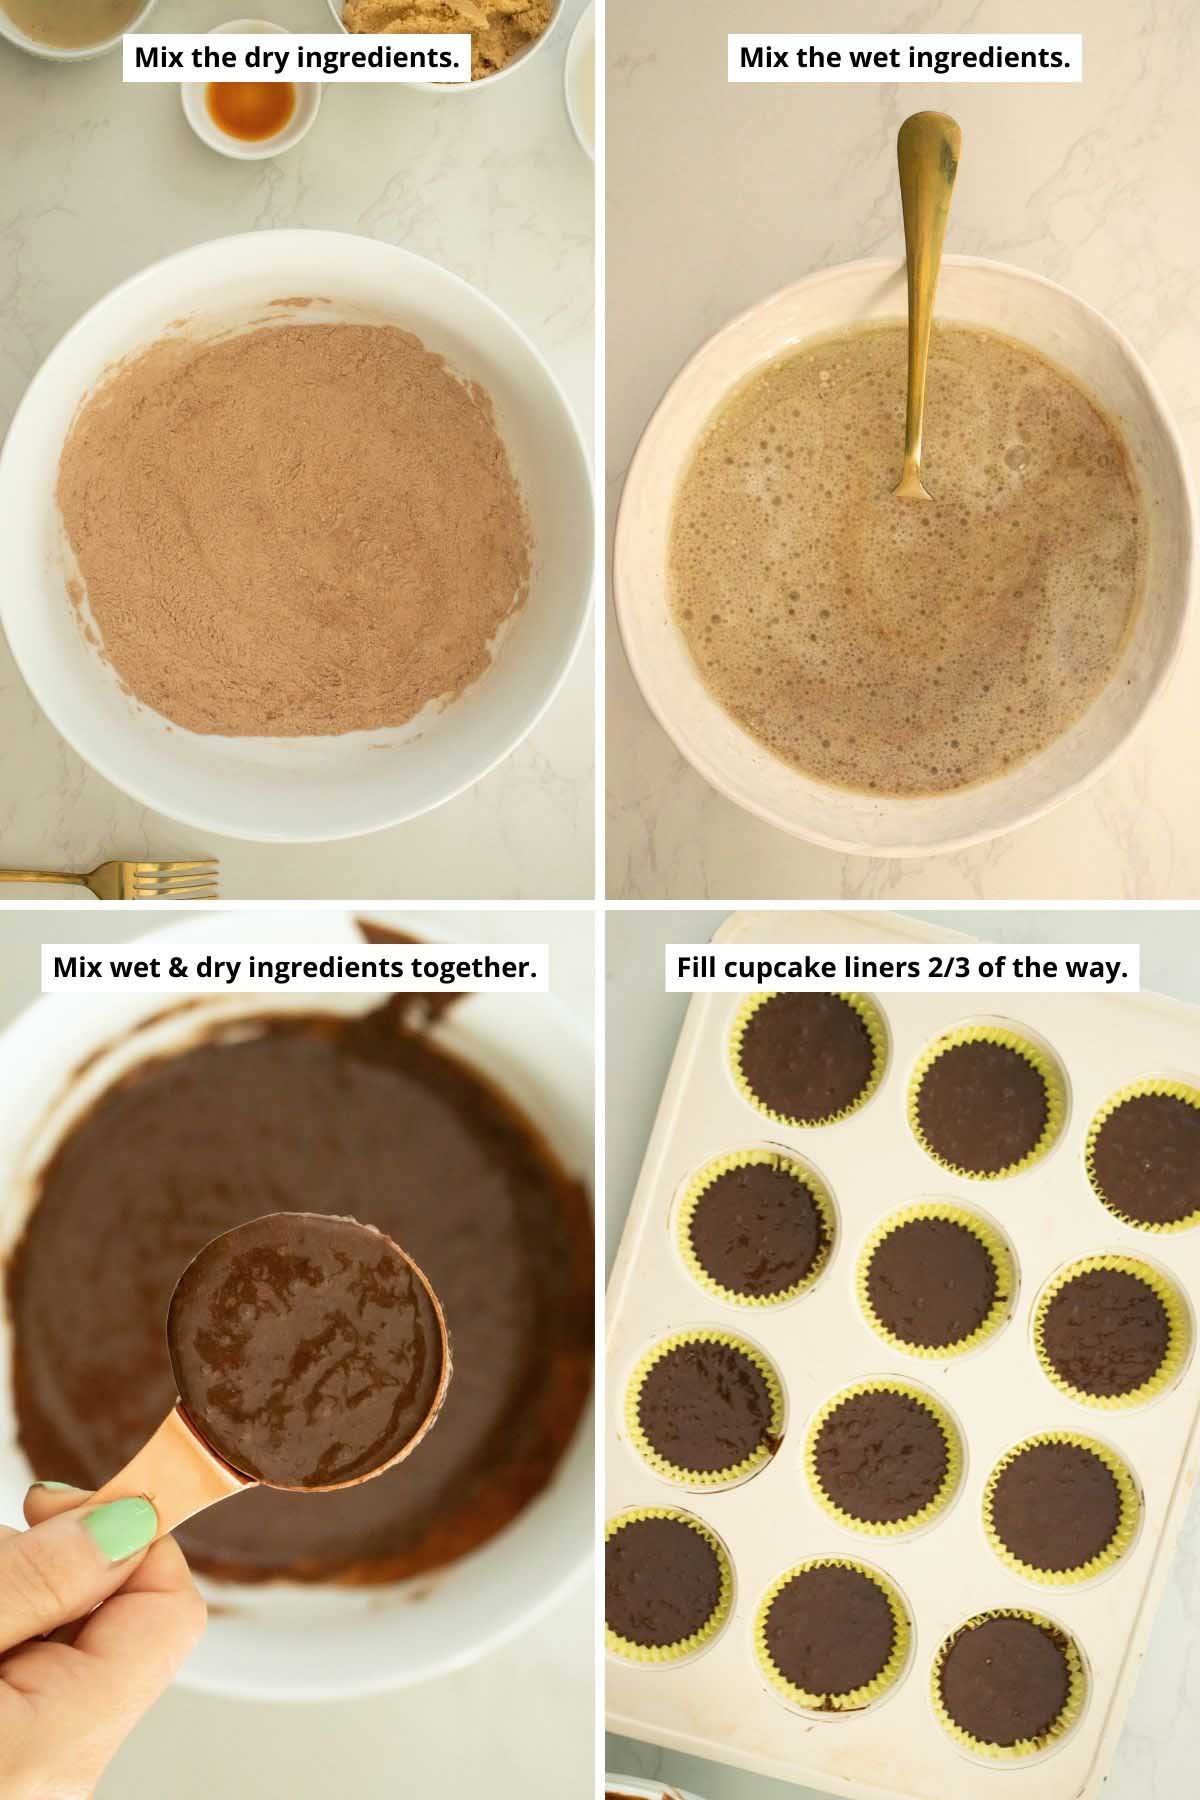 image collage showing mixed dry ingredients, wet ingredients, cupcake batter, and cupcakes in the baking pan before baking